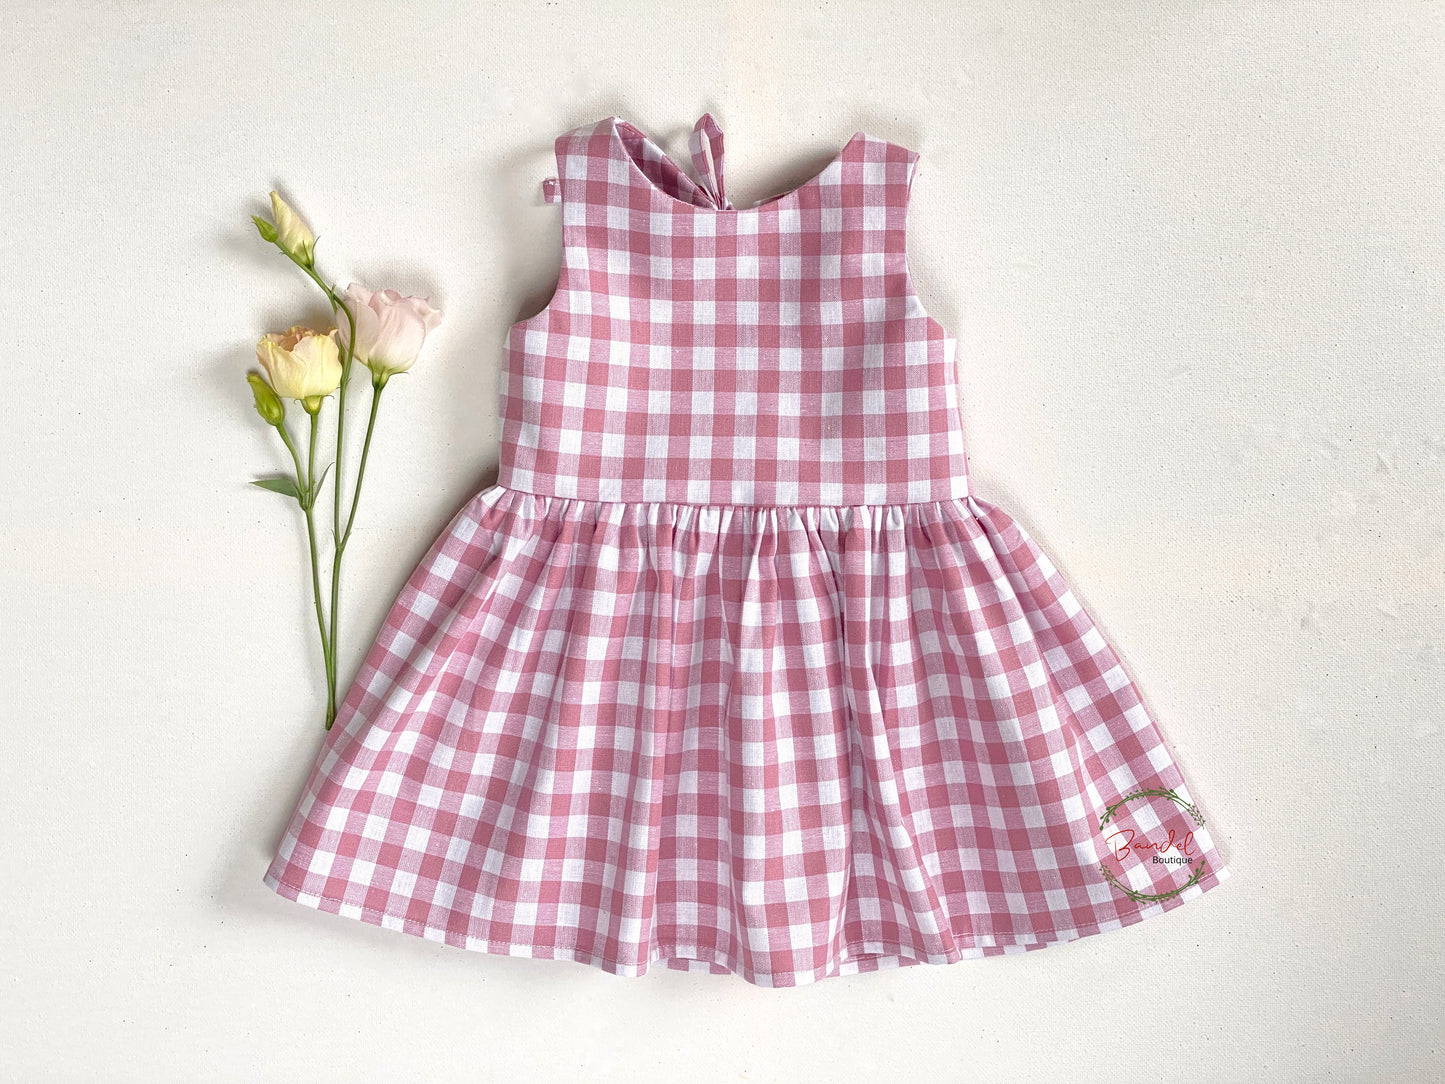 classic Rose Gingham Dress is made from old rose check cotton and features a simple front bodice with two rows of elastic for comfort and ease of fit. The large back opening with a bow-tie gives it a timeless look, perfect for any occasion. Knee length and full skirt provide the perfect balance.